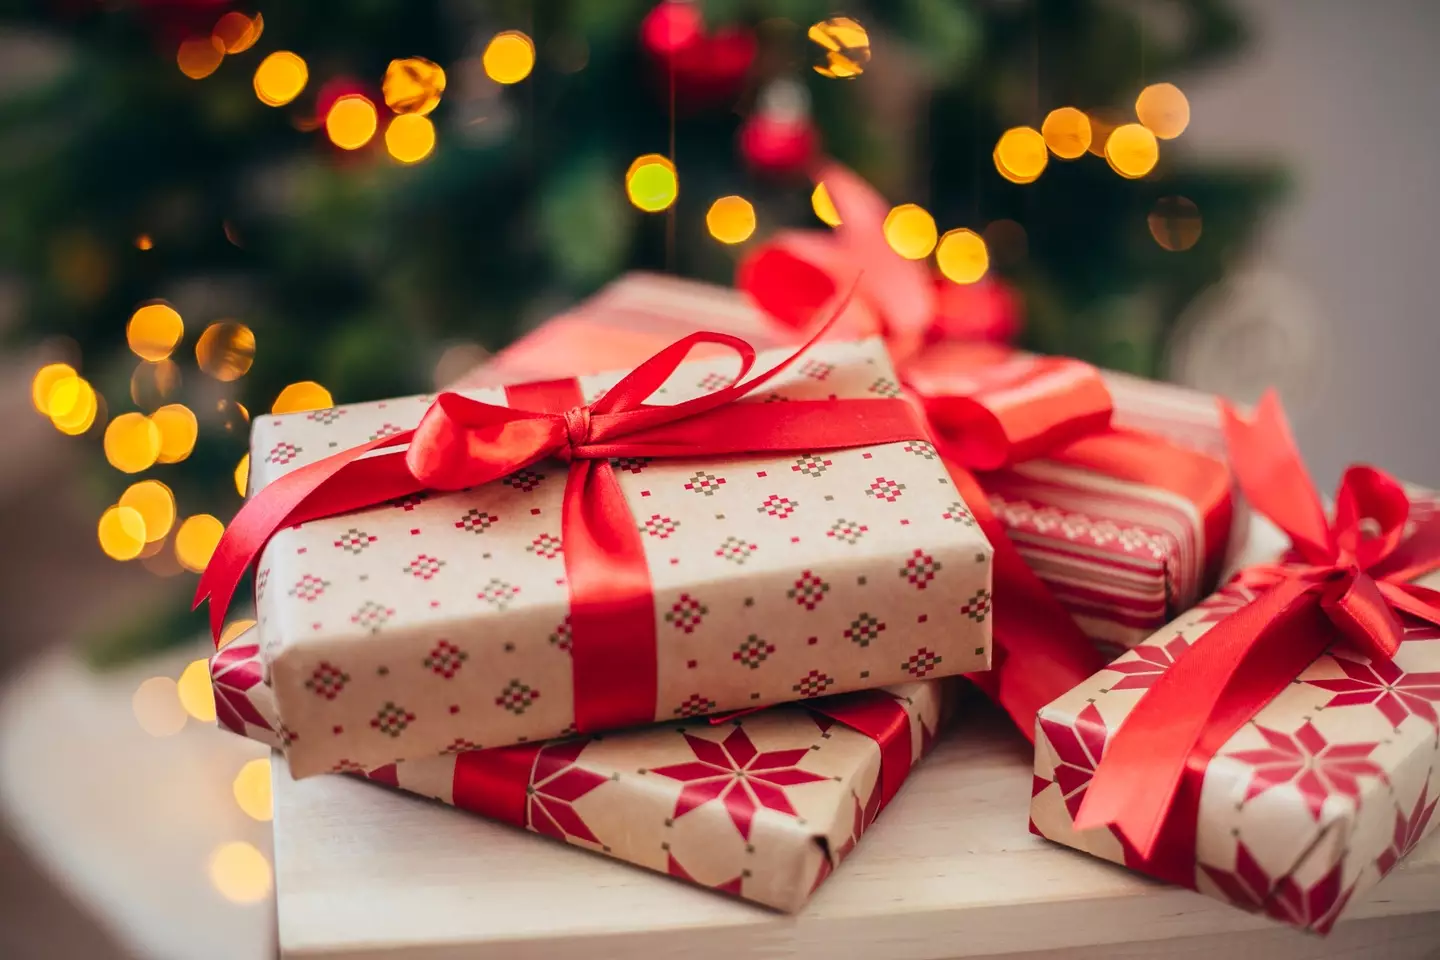 Get your shopping done ASAP to make sure your gifts arrive on time.